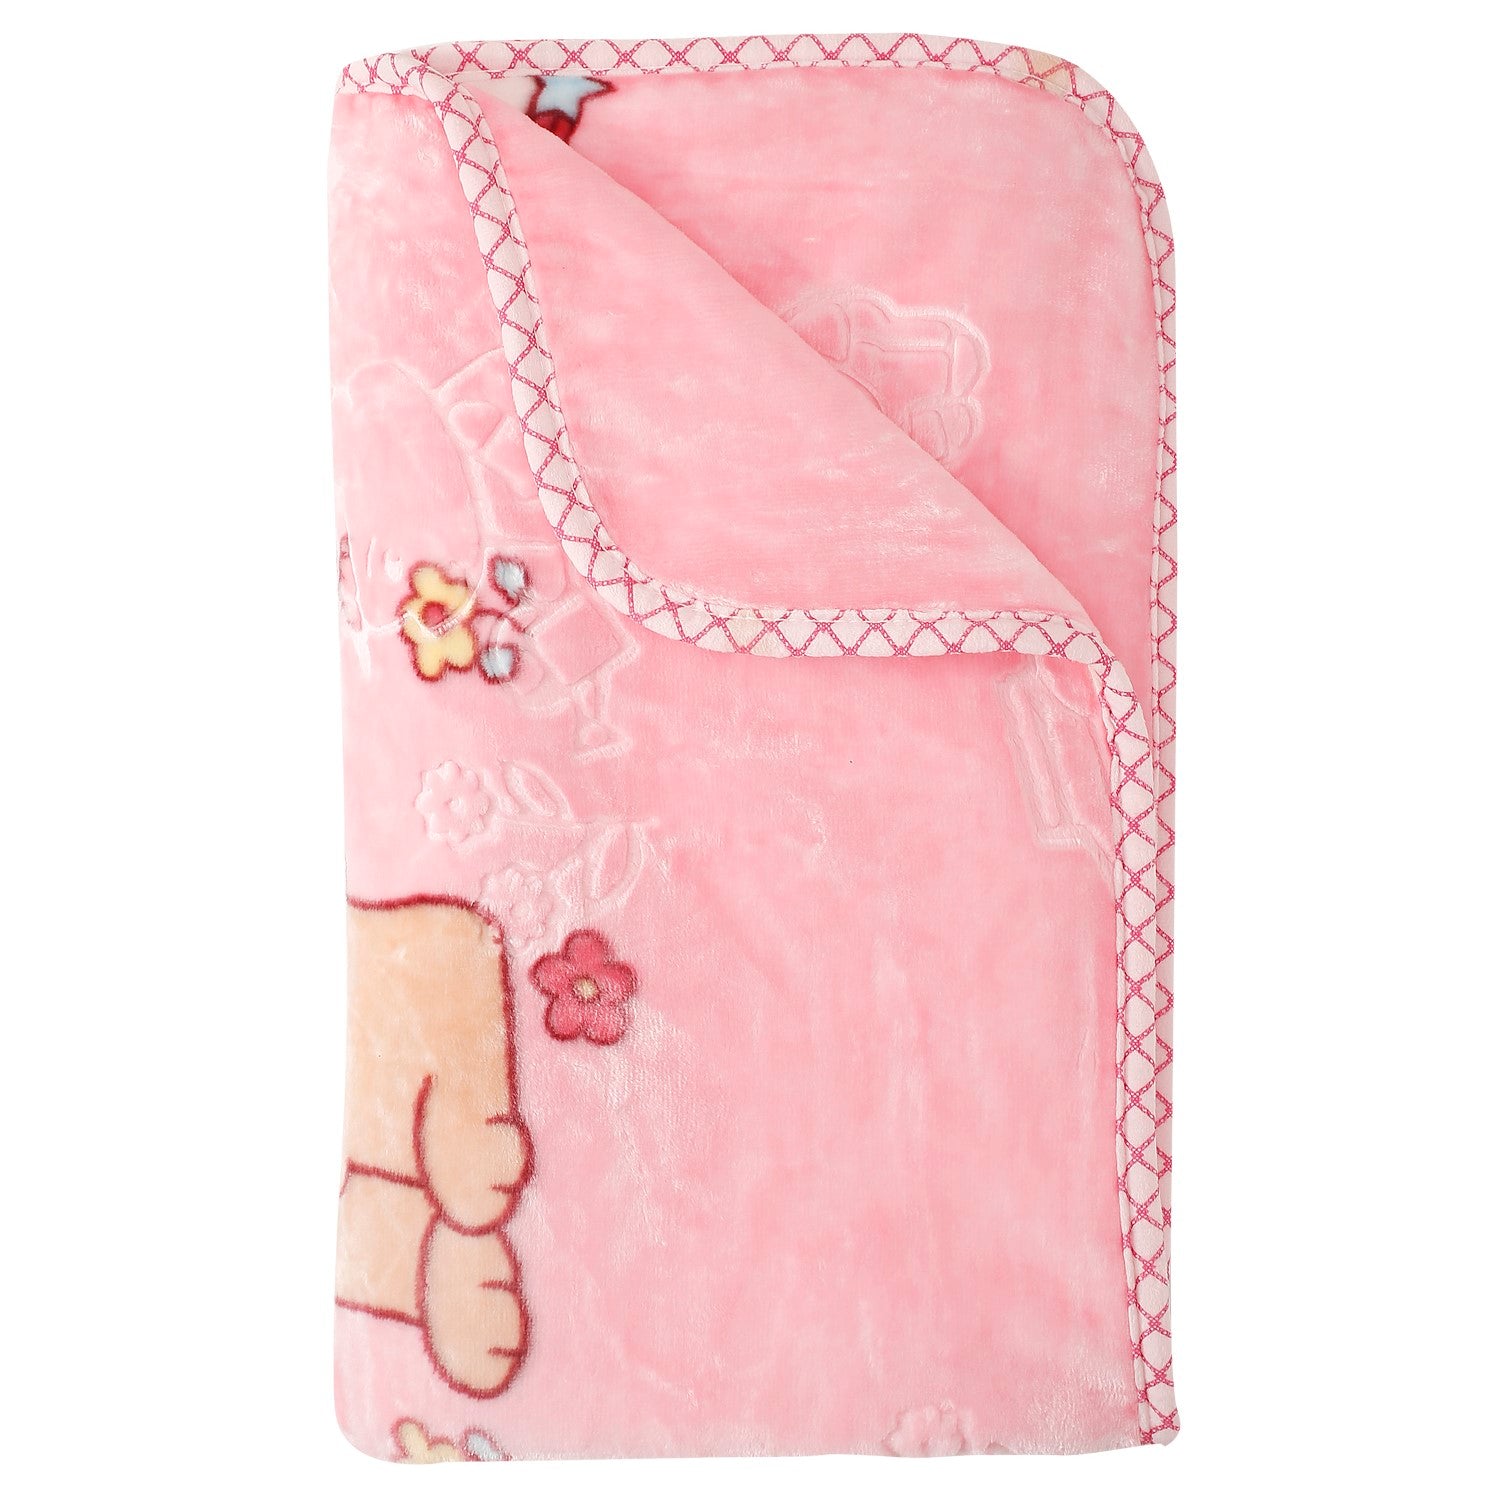 You've Got Mail Pink Blanket - Baby Moo